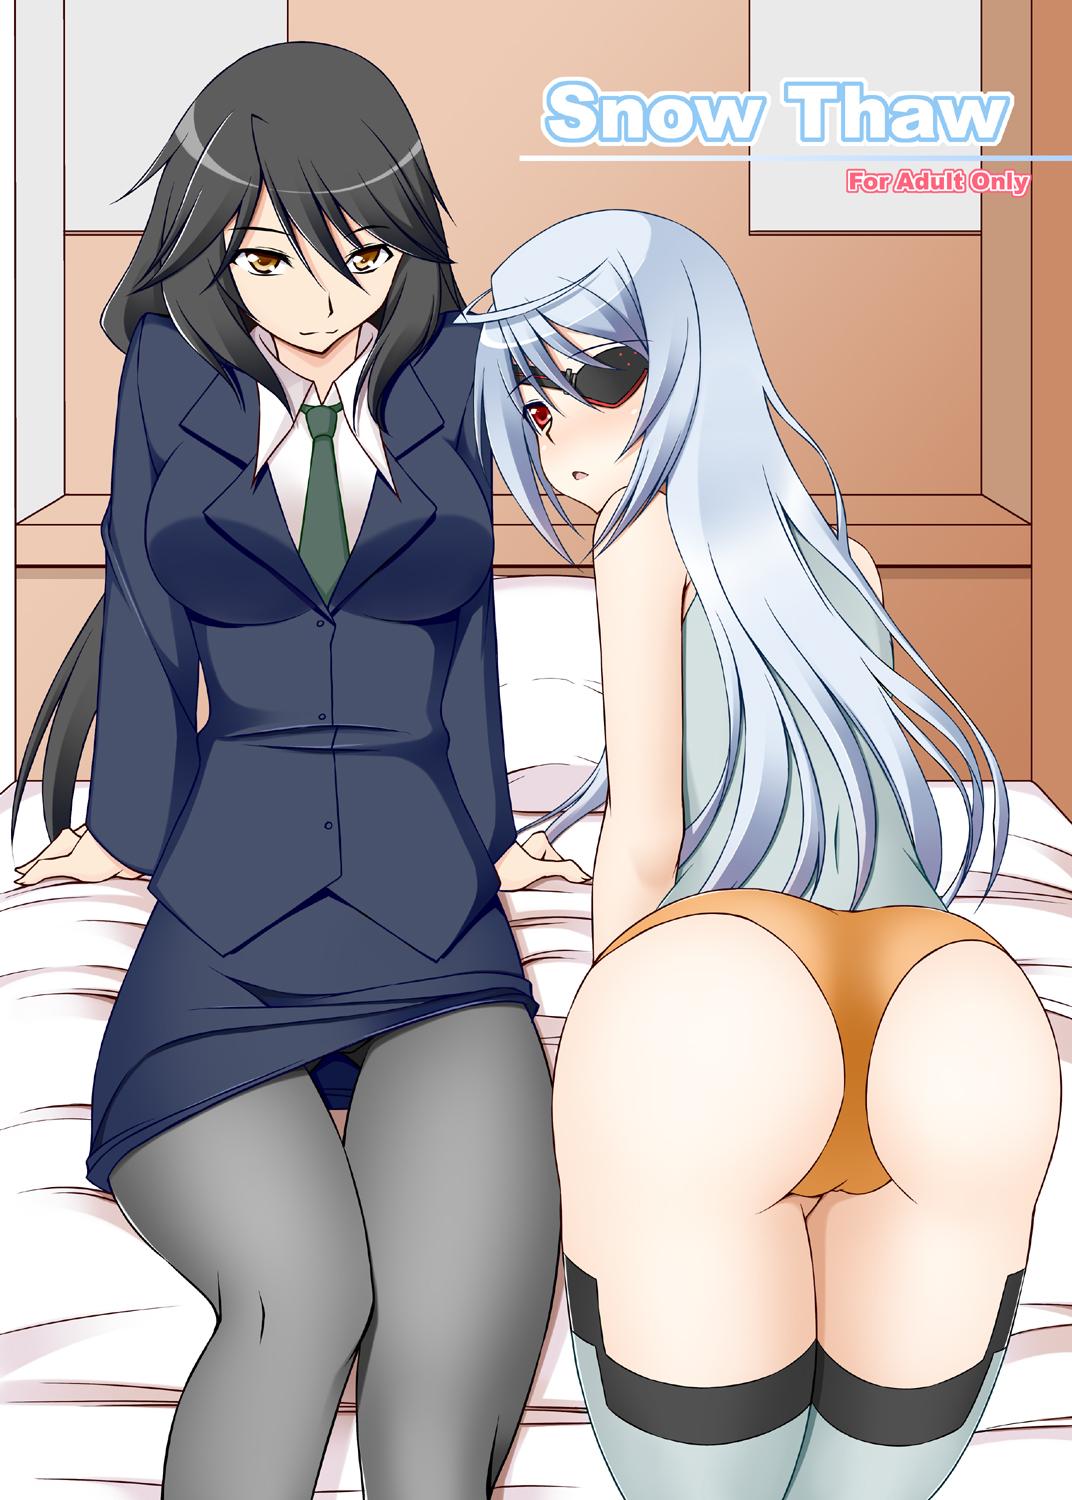 Butt Sex Snow Thaw - Infinite stratos Jerkoff - Page 1